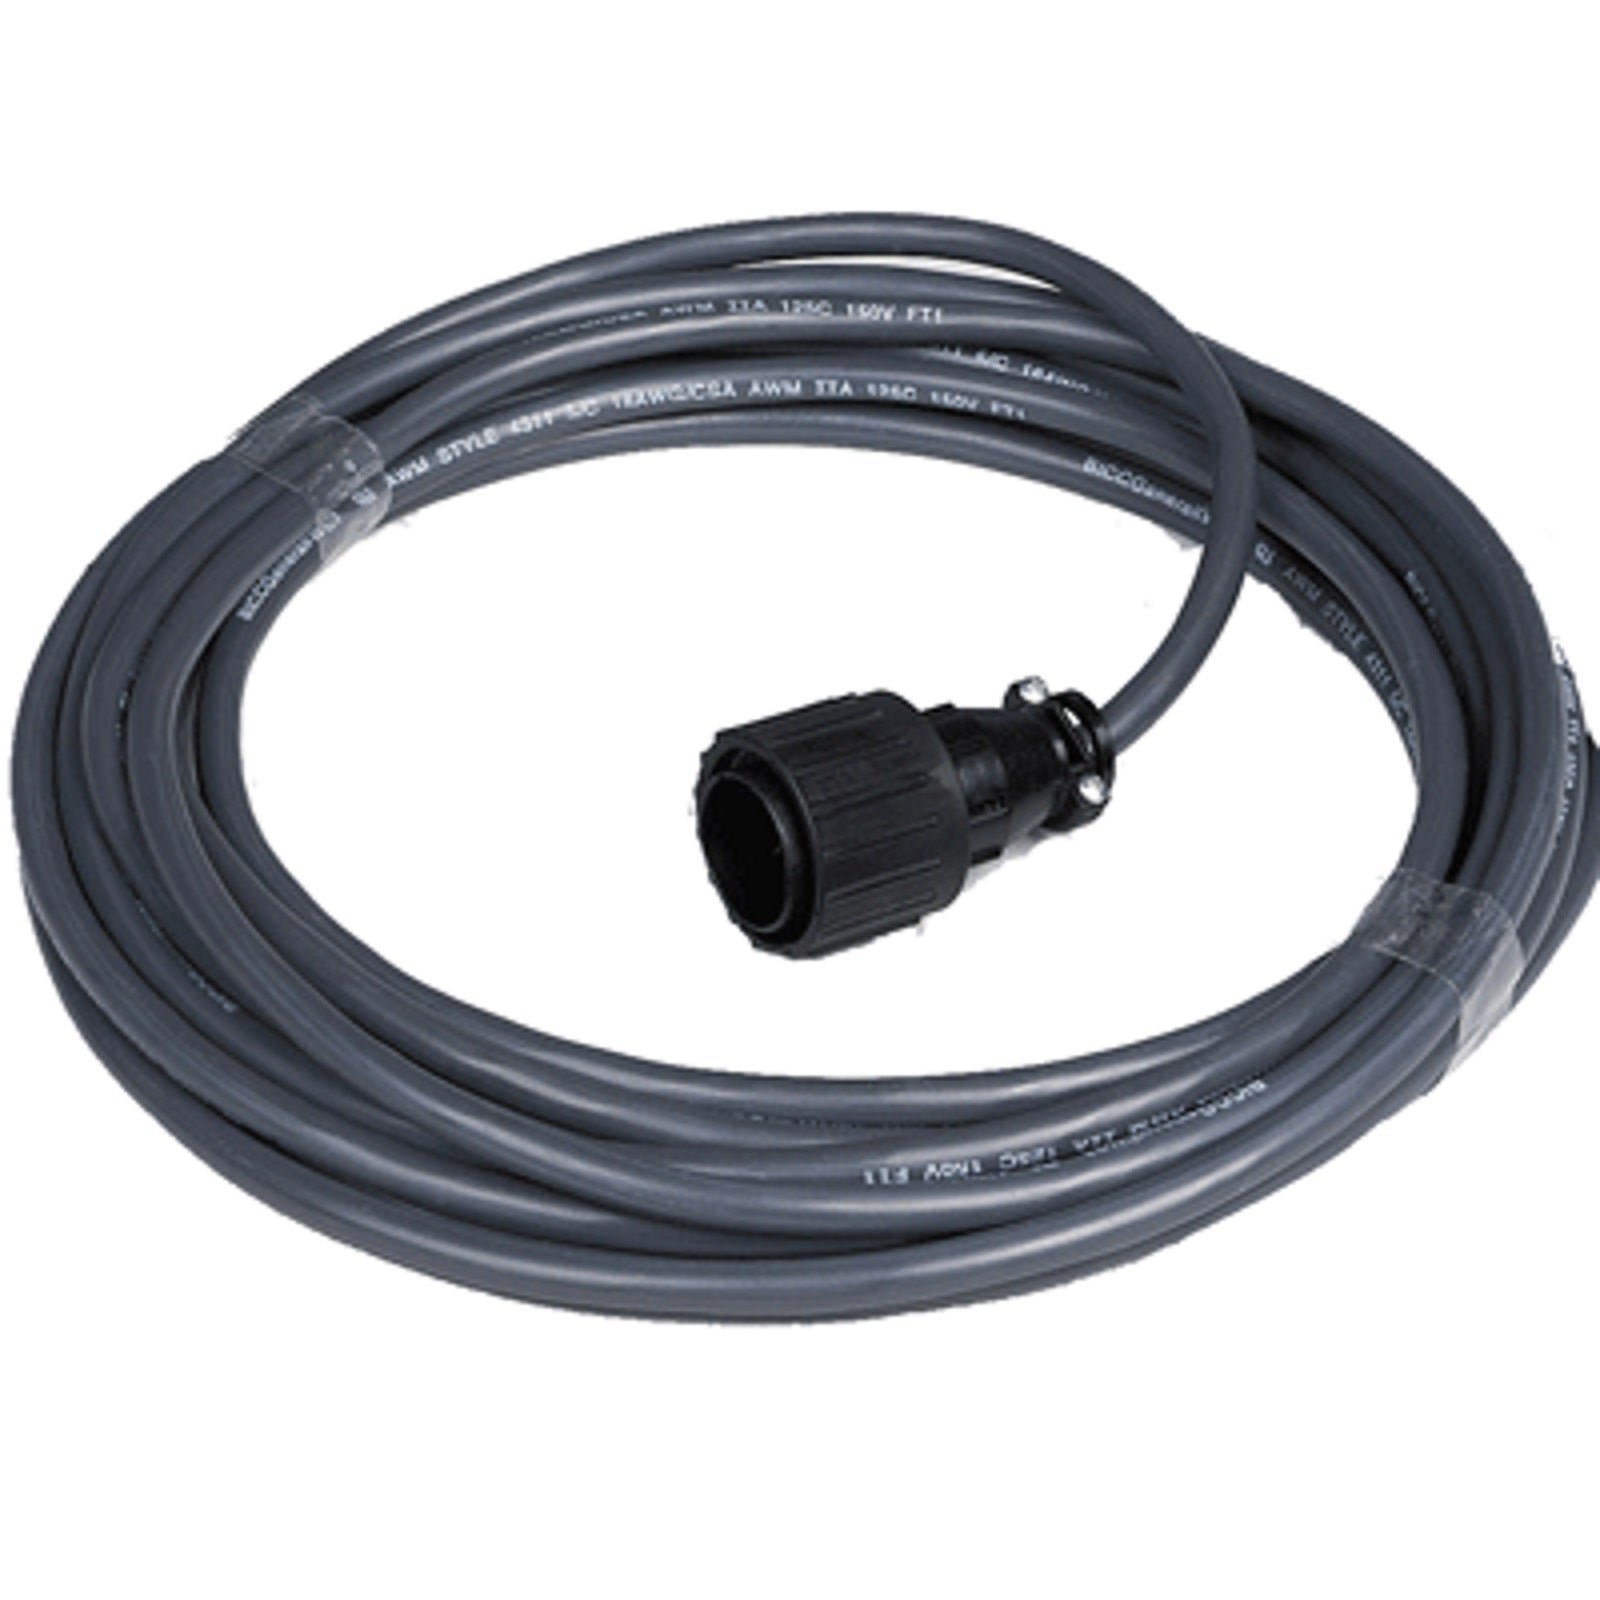 Miller 100' 14 Pin 24 VAC Extension Cable (242208100)